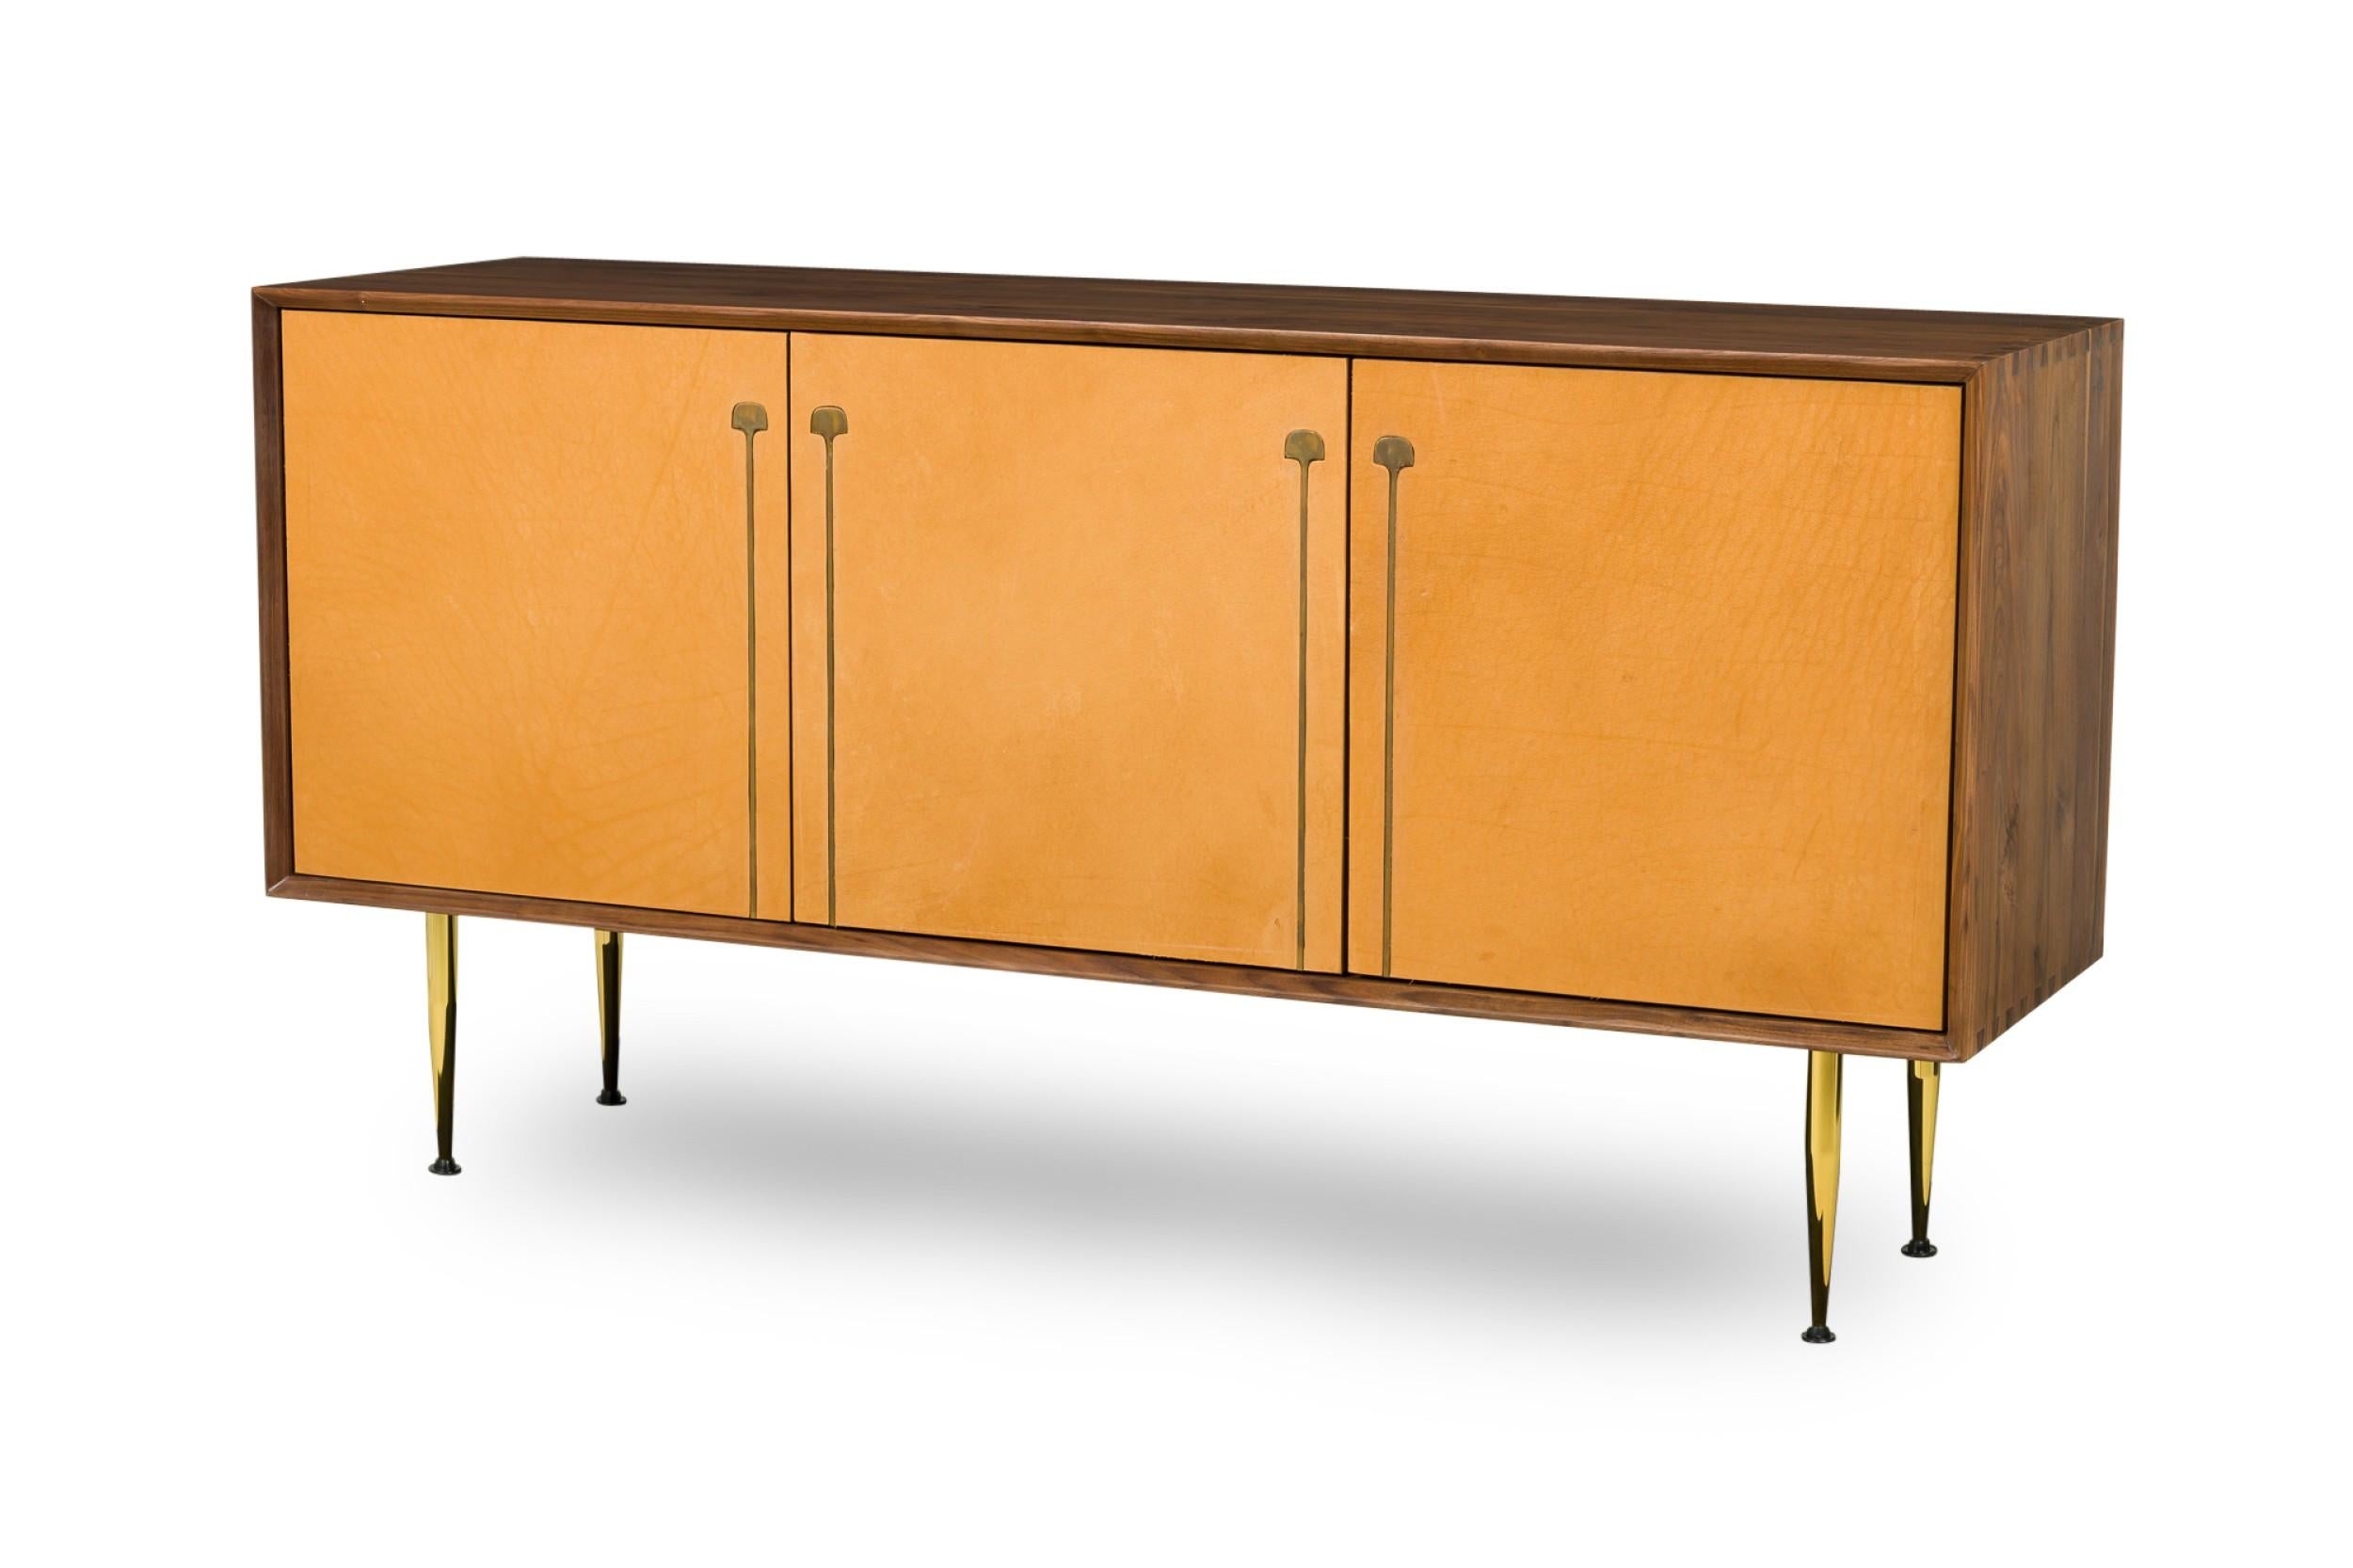 Contemporary / Mid-Century inspired credenza constructed of sustainably harvested FSC-certified wood and features elegant bronze inlaid leather upholstered doors which open up to ample storage, sitting atop tapered brass legs. 
 

